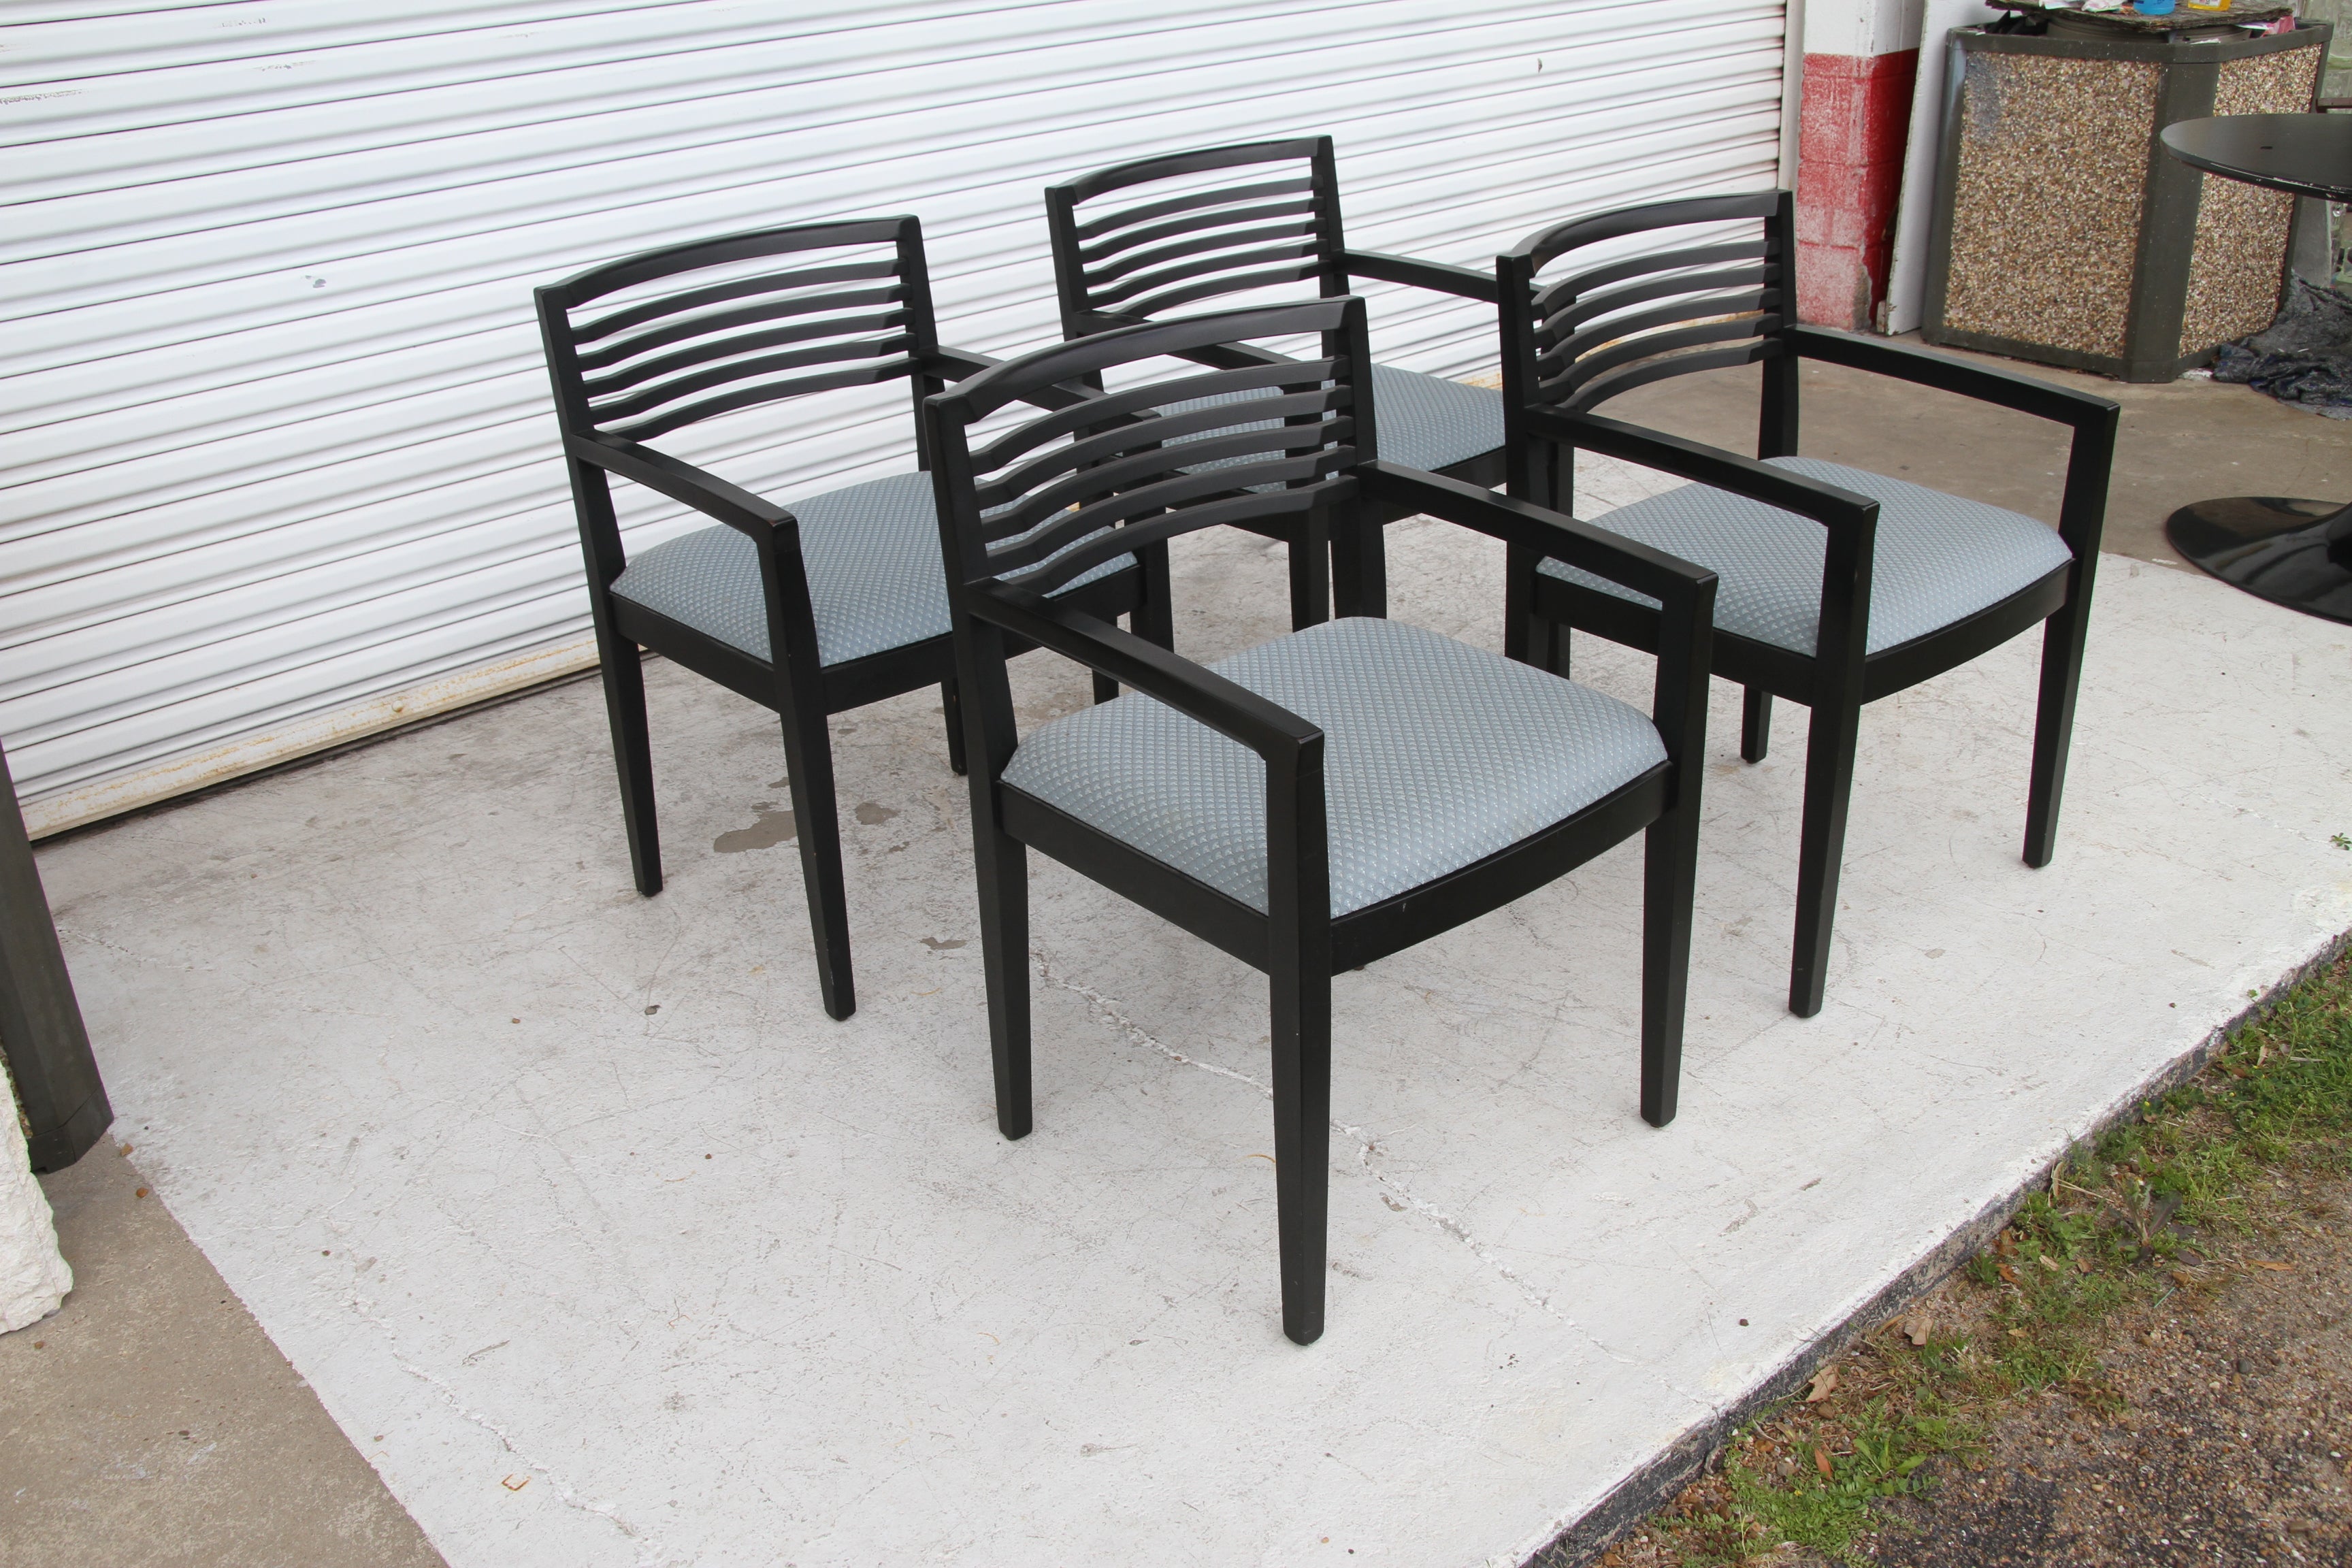 Set of 4 ebonized Knoll Ricchio chairs
1990

Winner of the 1991 Roscoe award for furniture design. 

Set of four ebonized dining chairs with upholstered seat bottoms, downward tapered armrests and scooped backs. 
The chairs retain the